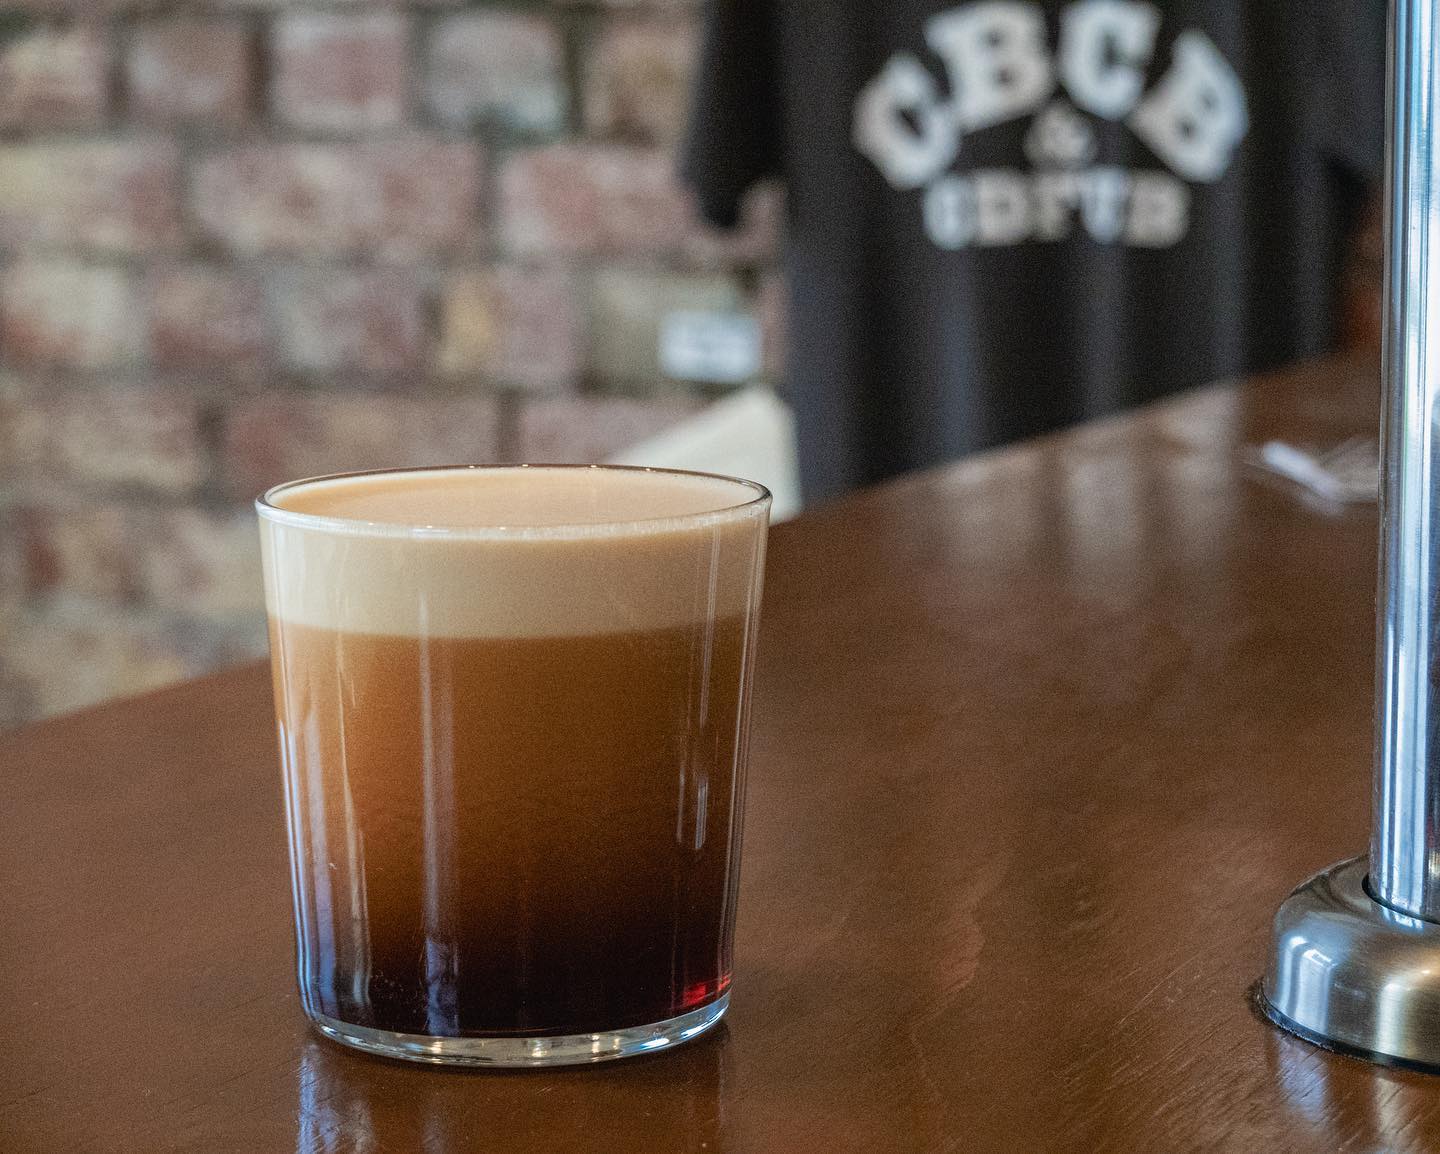 And every single cup we guzzled was Hallelujah

⚡️

Nitro
Coffee
Grail